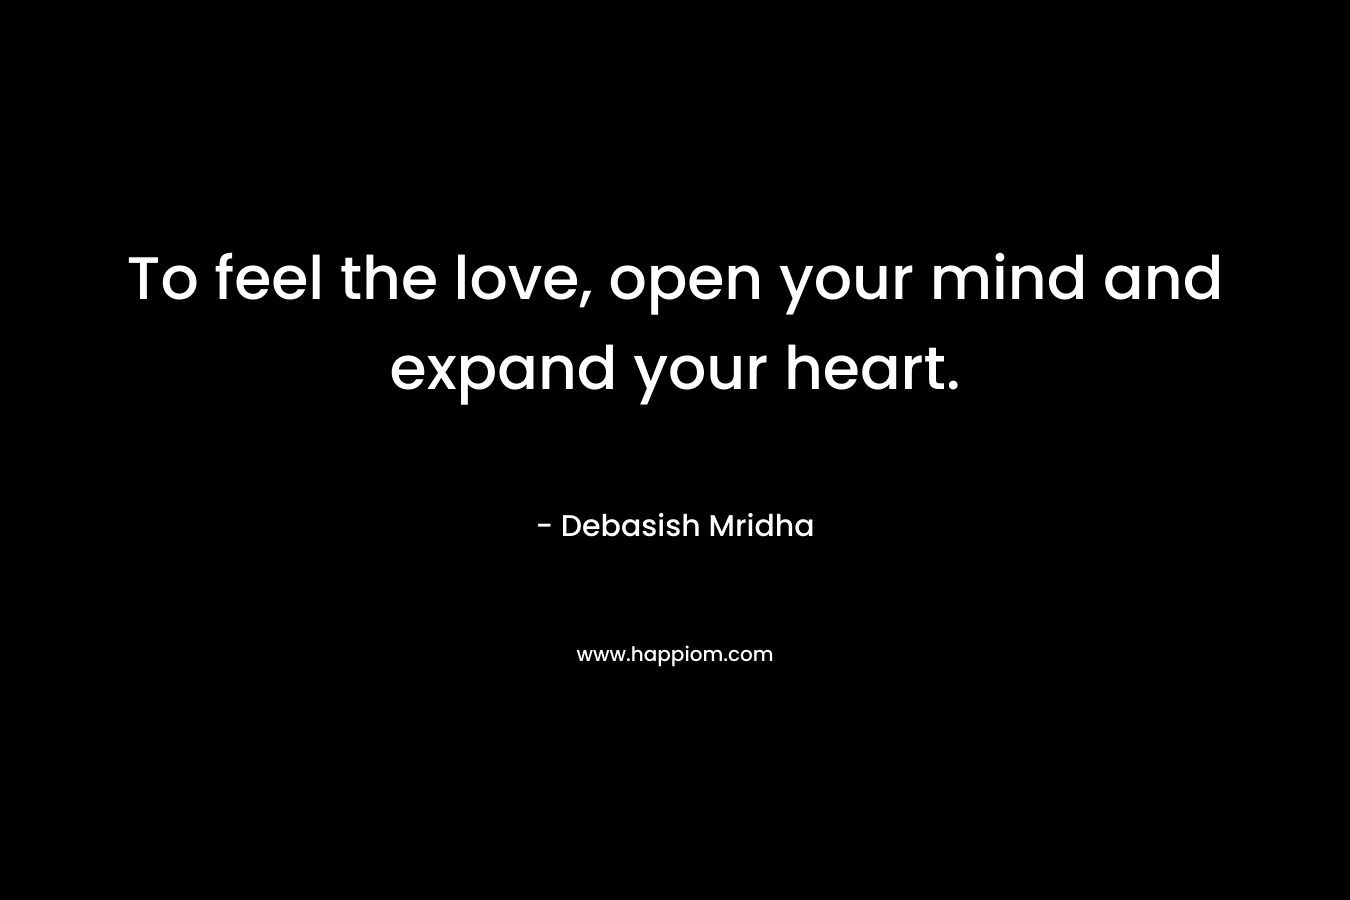 To feel the love, open your mind and expand your heart.